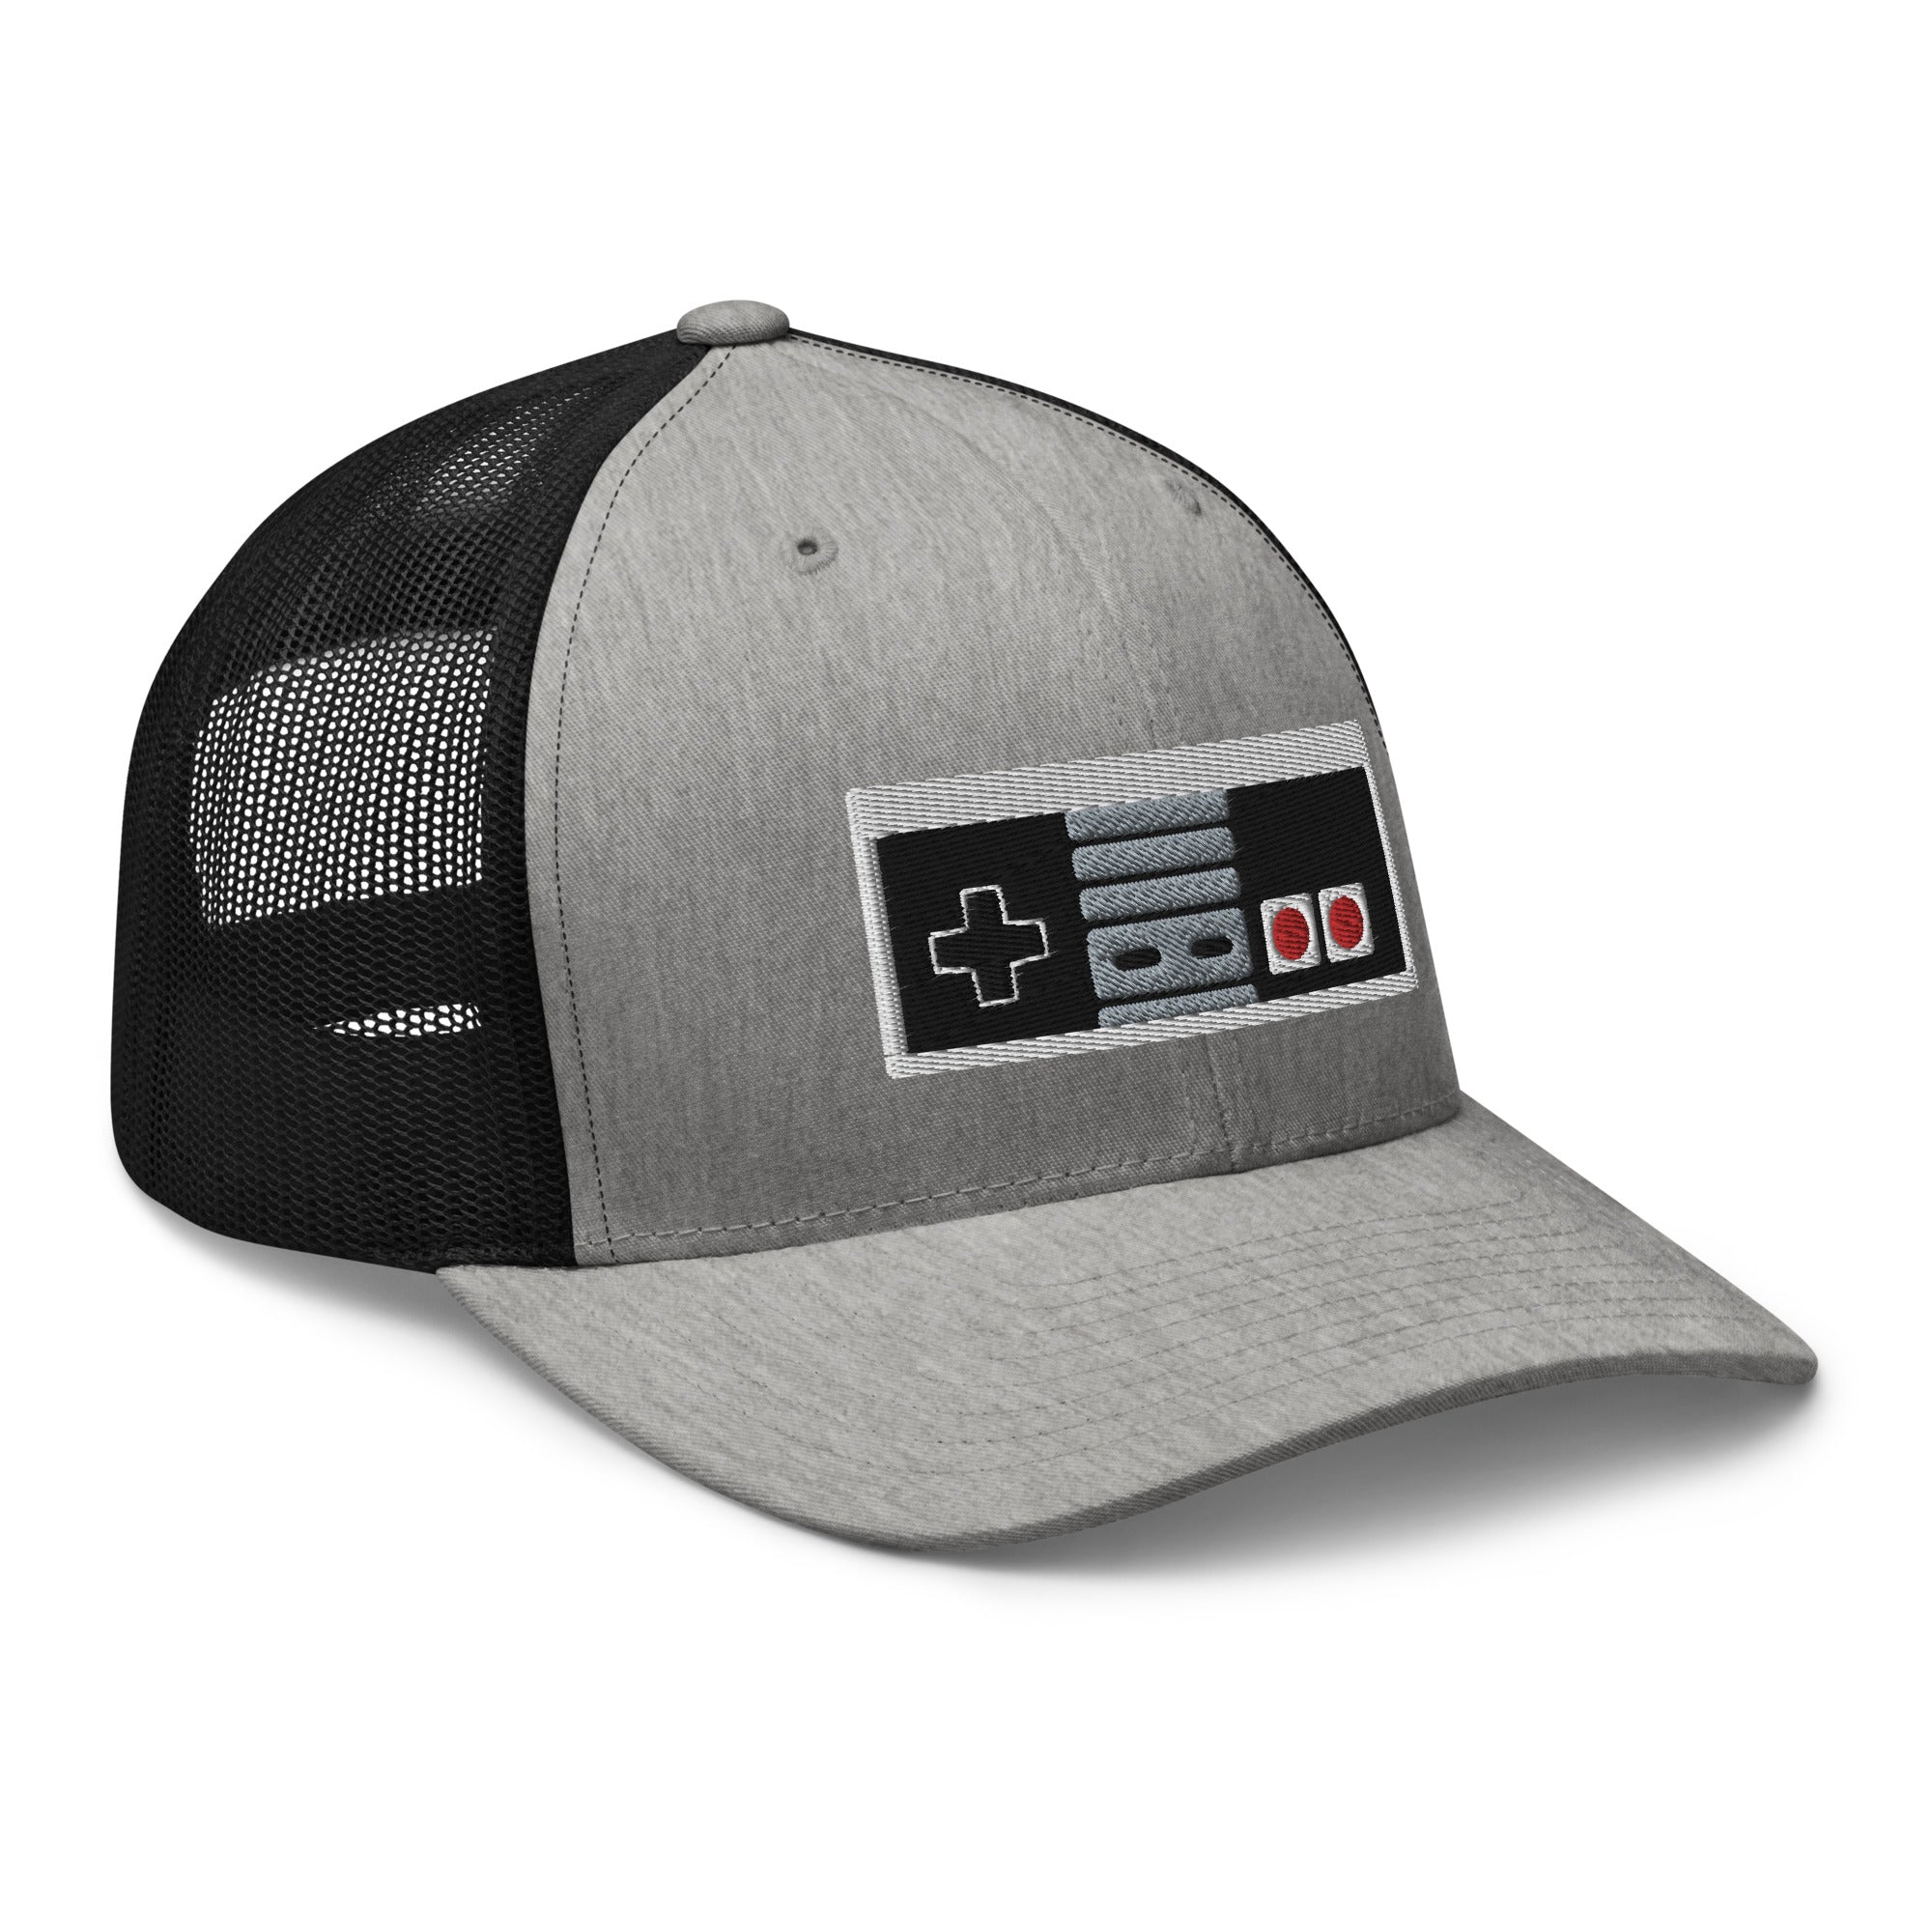 Classic 80's Game Controller Embroidered Retro Trucker Cap Snapback Hat